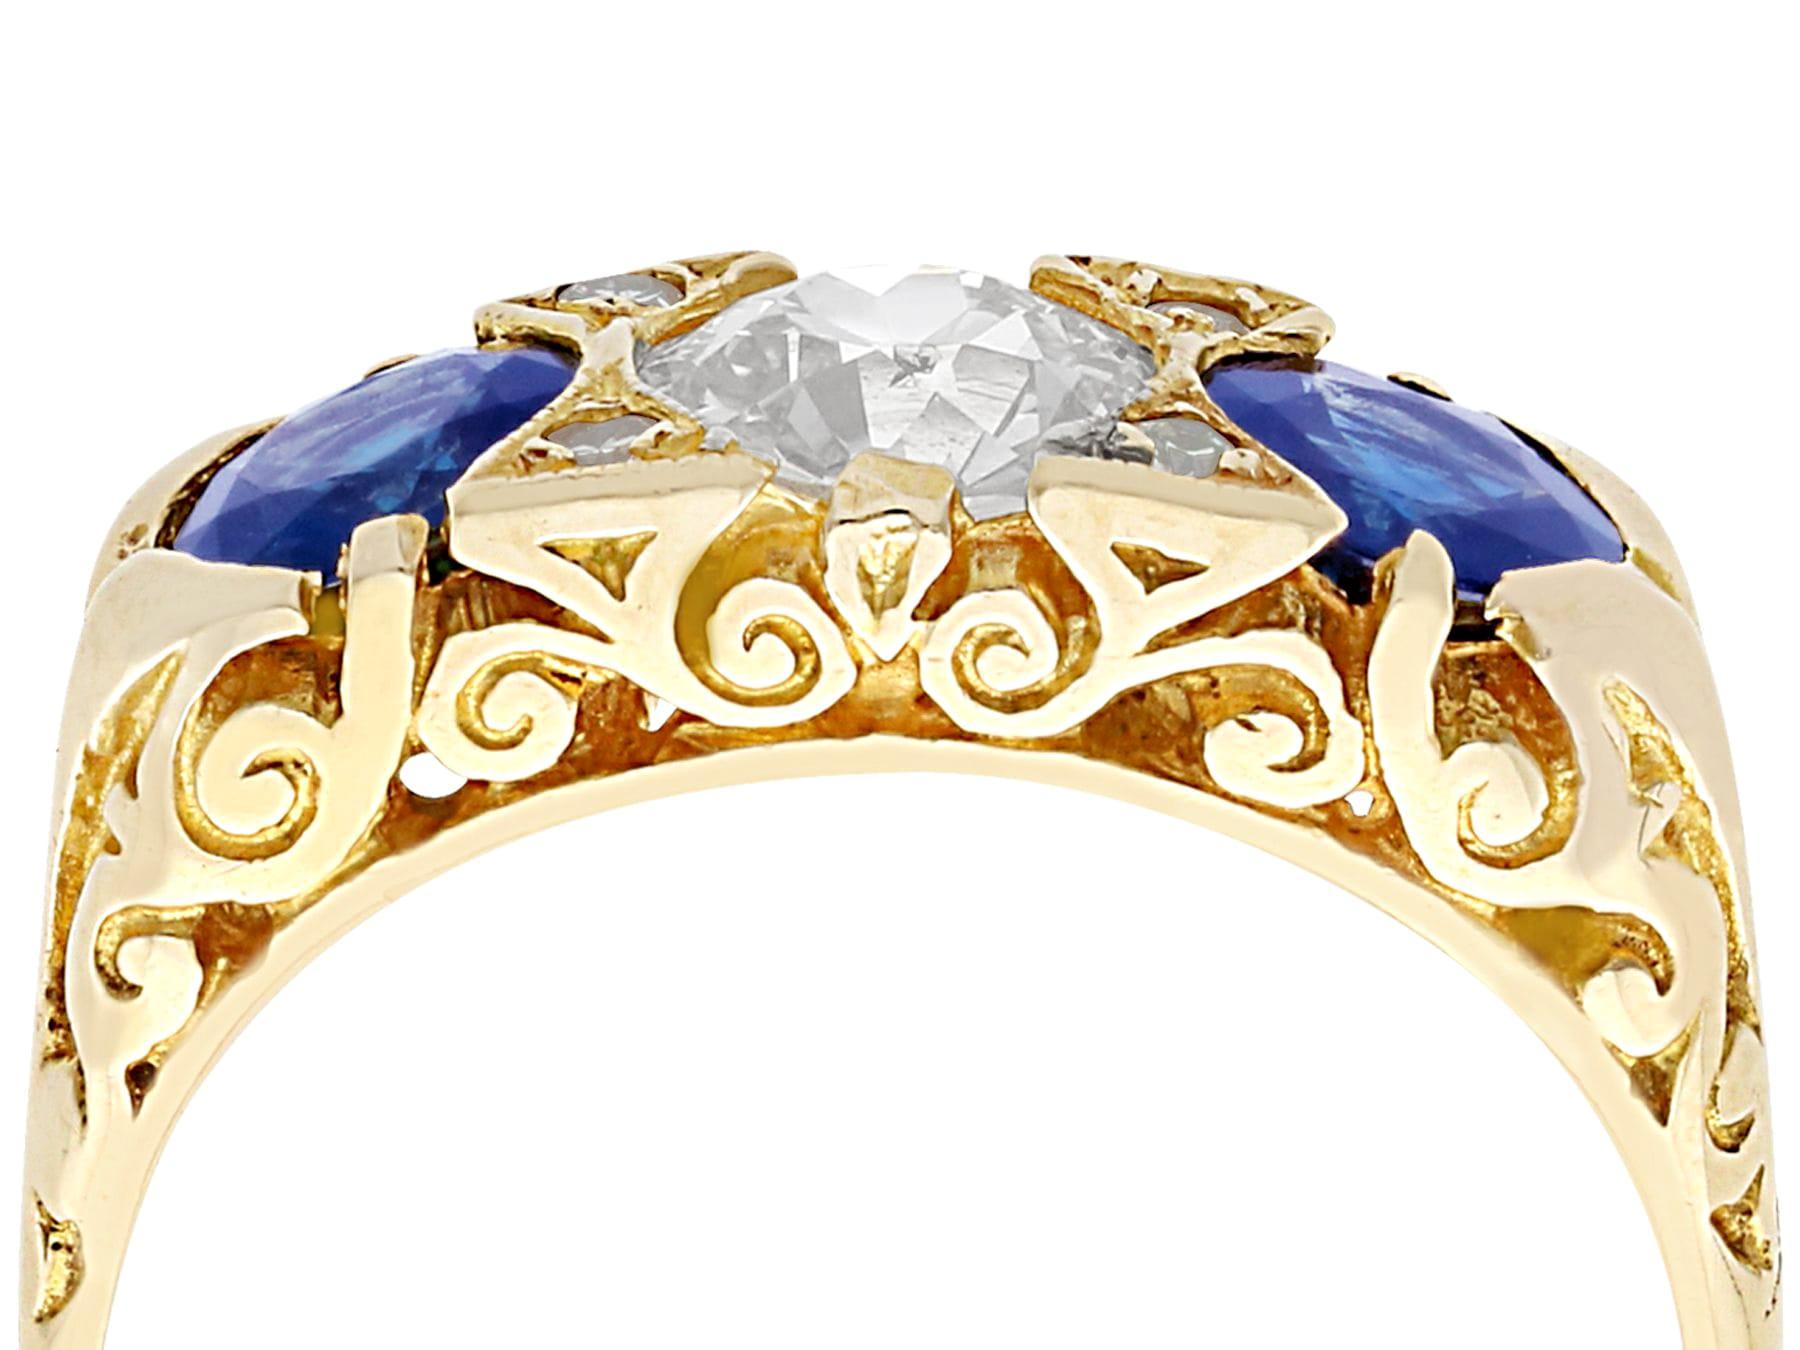 An impressive antique 1.32 carat natural sapphire and 0.81 carat diamond, 15 karat yellow gold dress ring; part of our diverse estate jewelry collections.

This fine and impressive sapphire and diamond ring has been crafted in 15k yellow gold.

The